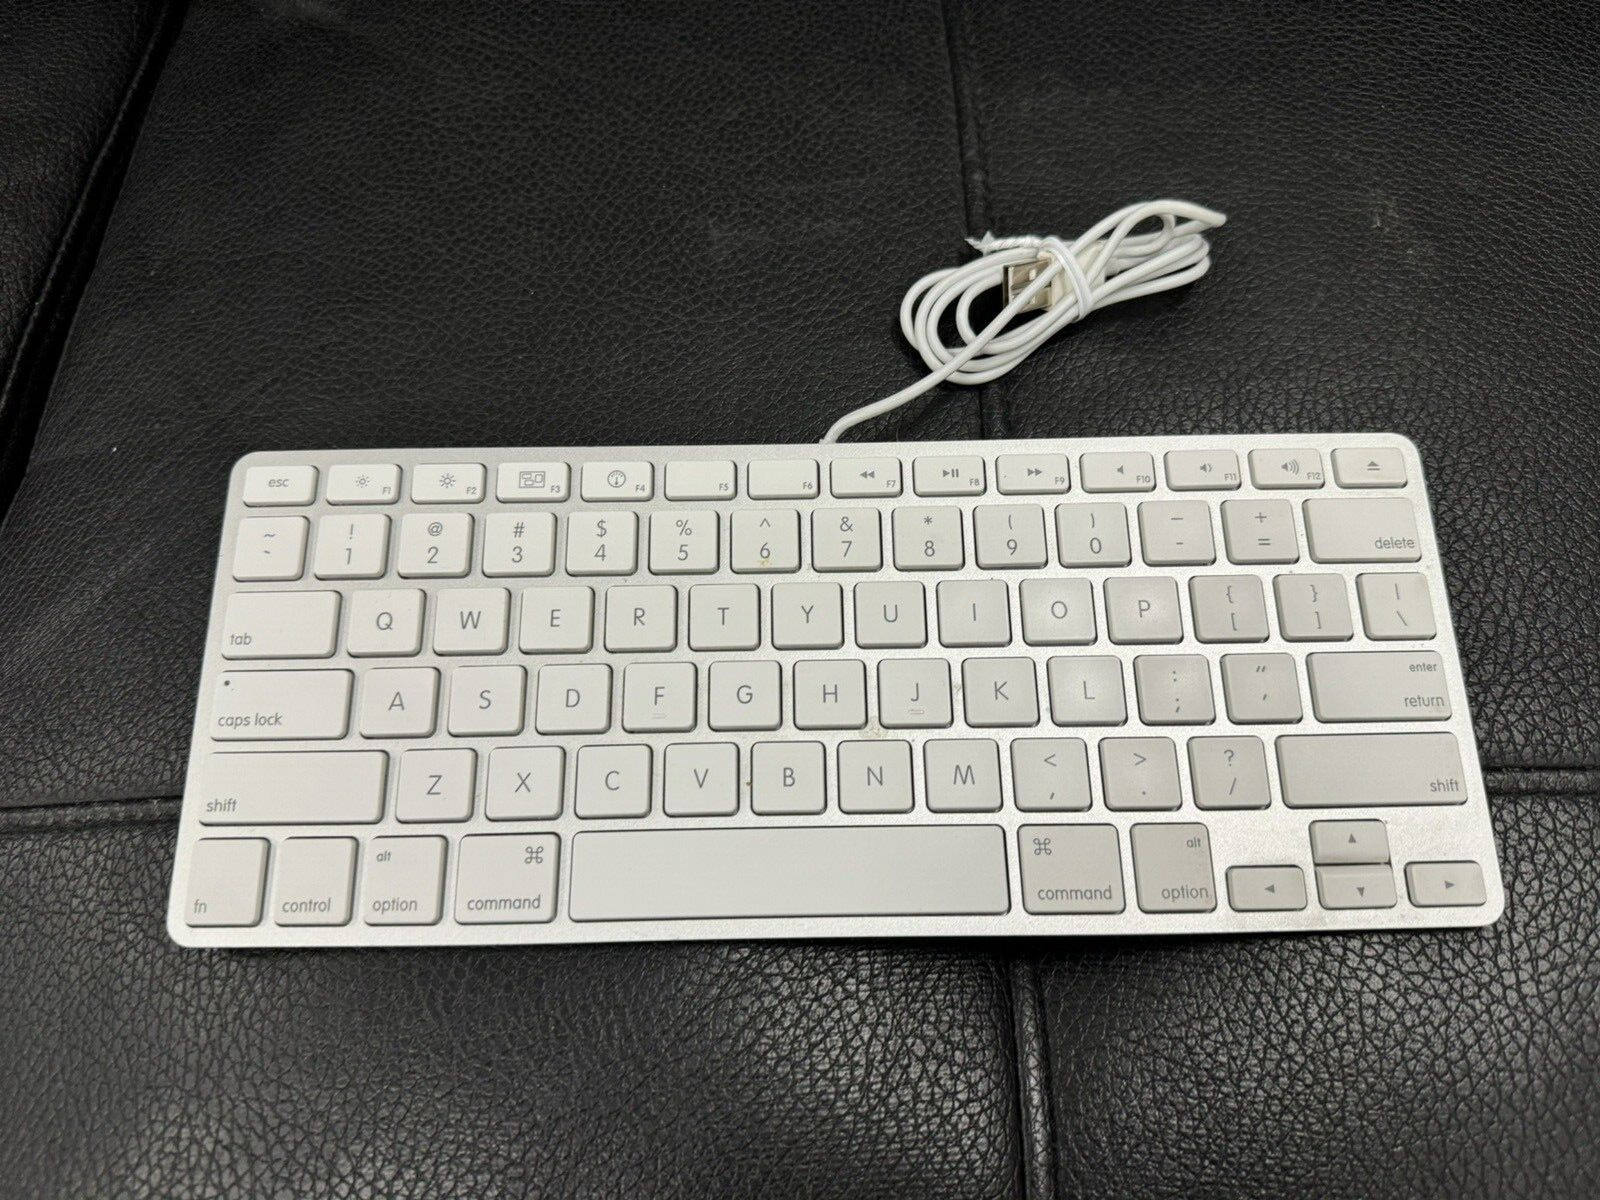 Apple A1242 White USB Wired Keyboard Tested Works Great